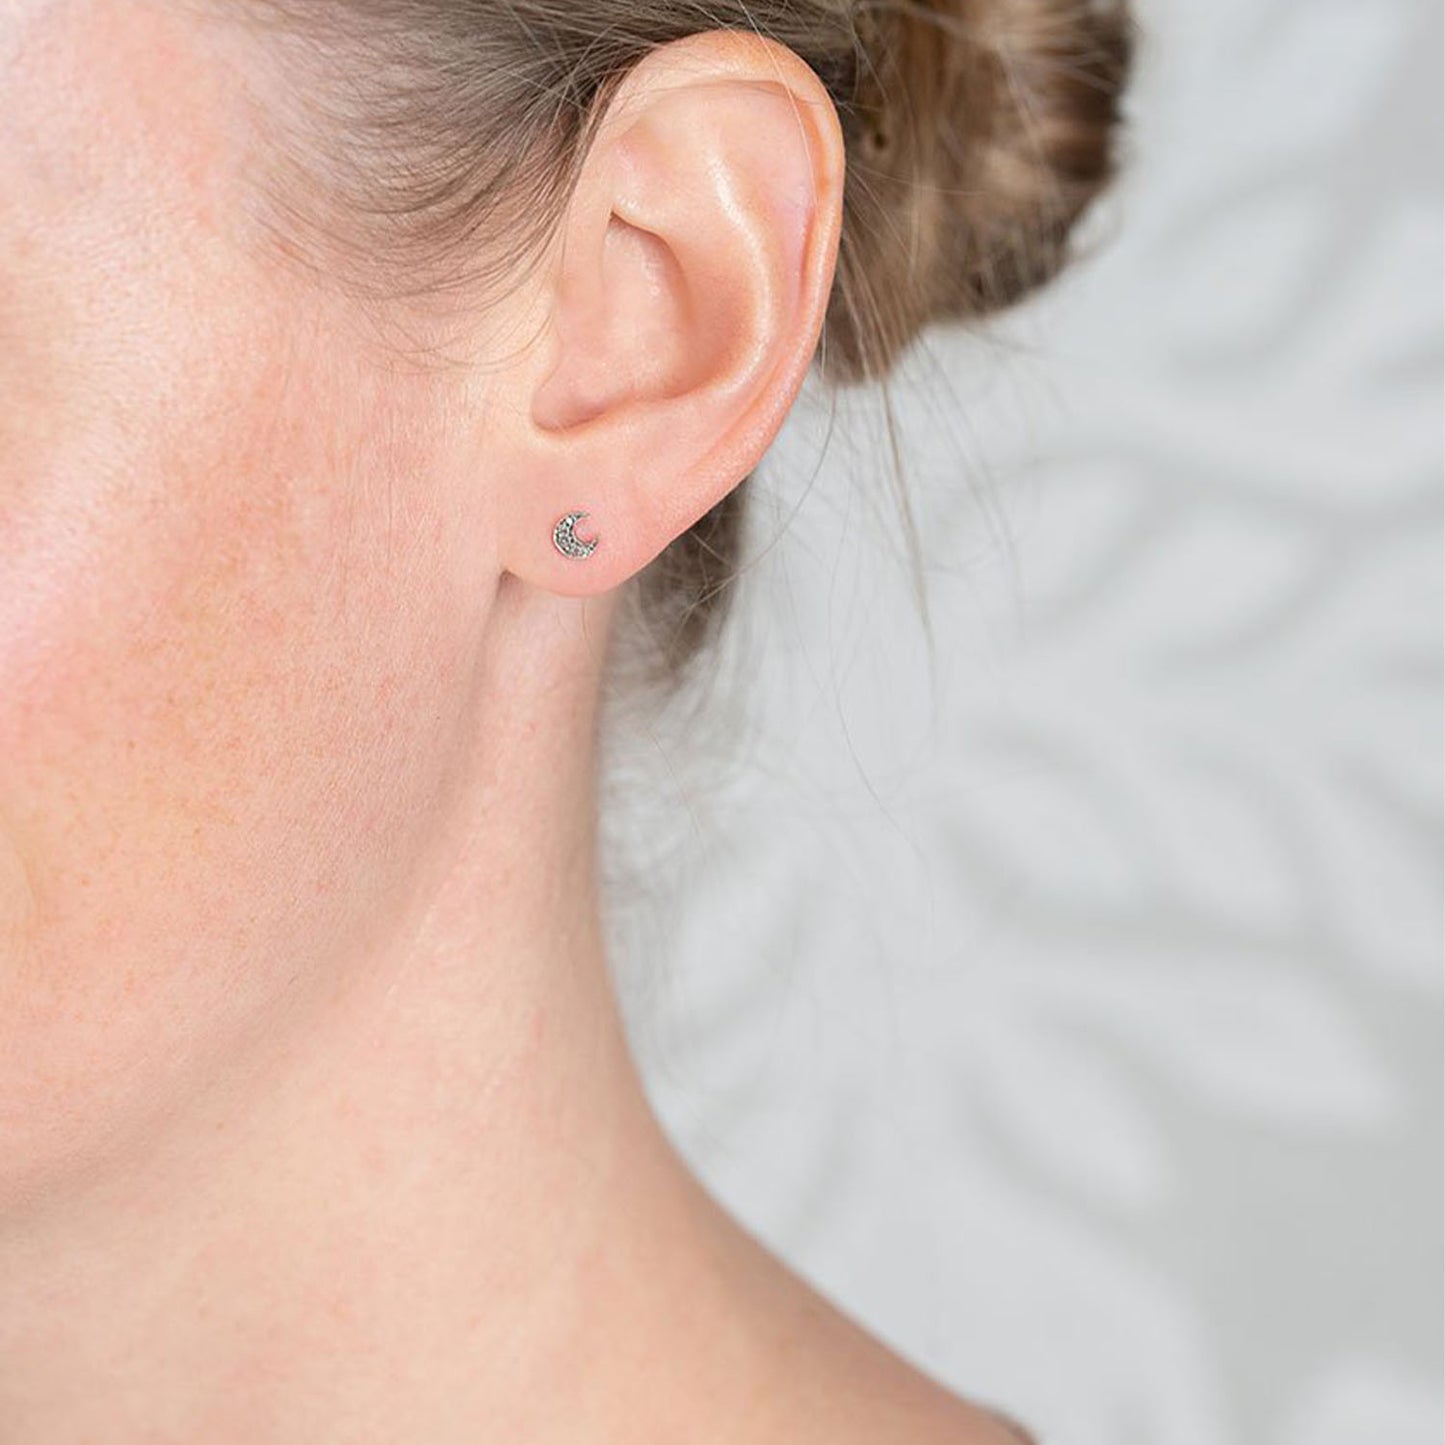 Laura Lee oxidised silver diamond set crescent moon stud earrings with 9ct yellow gold posts and butterfly backs seen on women's ear.